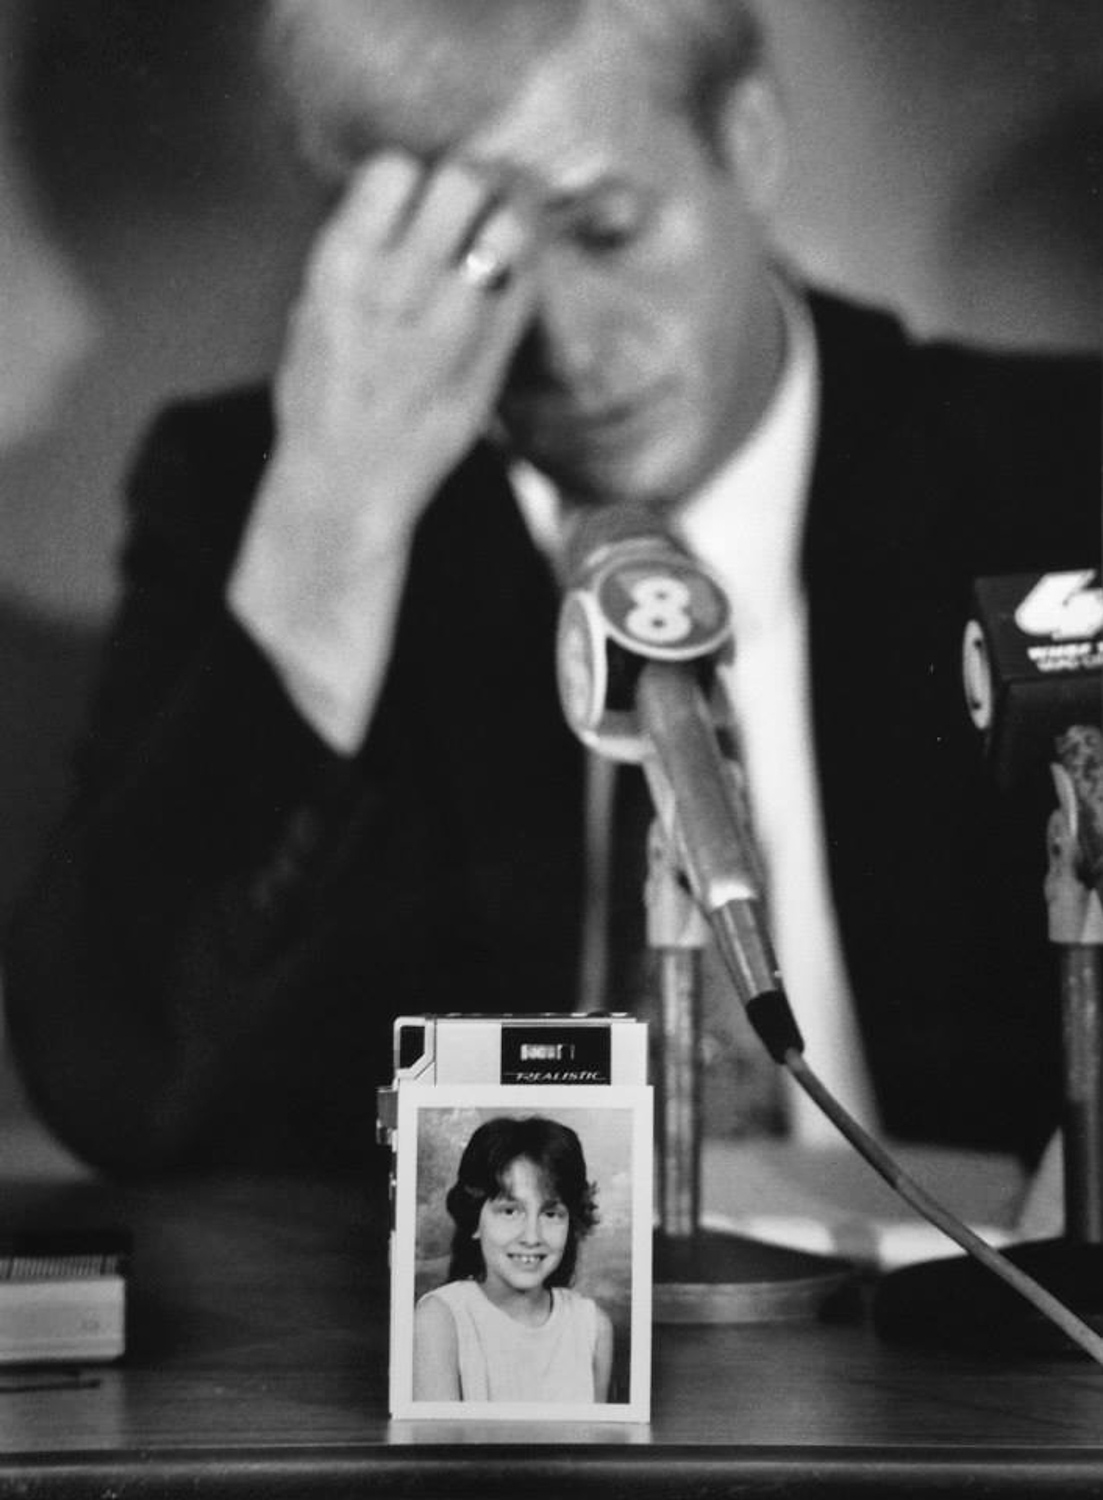 The school photo of murder victim Jennifer Ann Lewis rests against a reporter’s tape recorder as Davenport investigator Don Schaeffer pauses to collect himself while discussing the details of the case. The smoldering body of the 9-year-old, from Rock Island, Illinois,  was found the night before near Jefferson Elementary School in Davenport, Iowa.